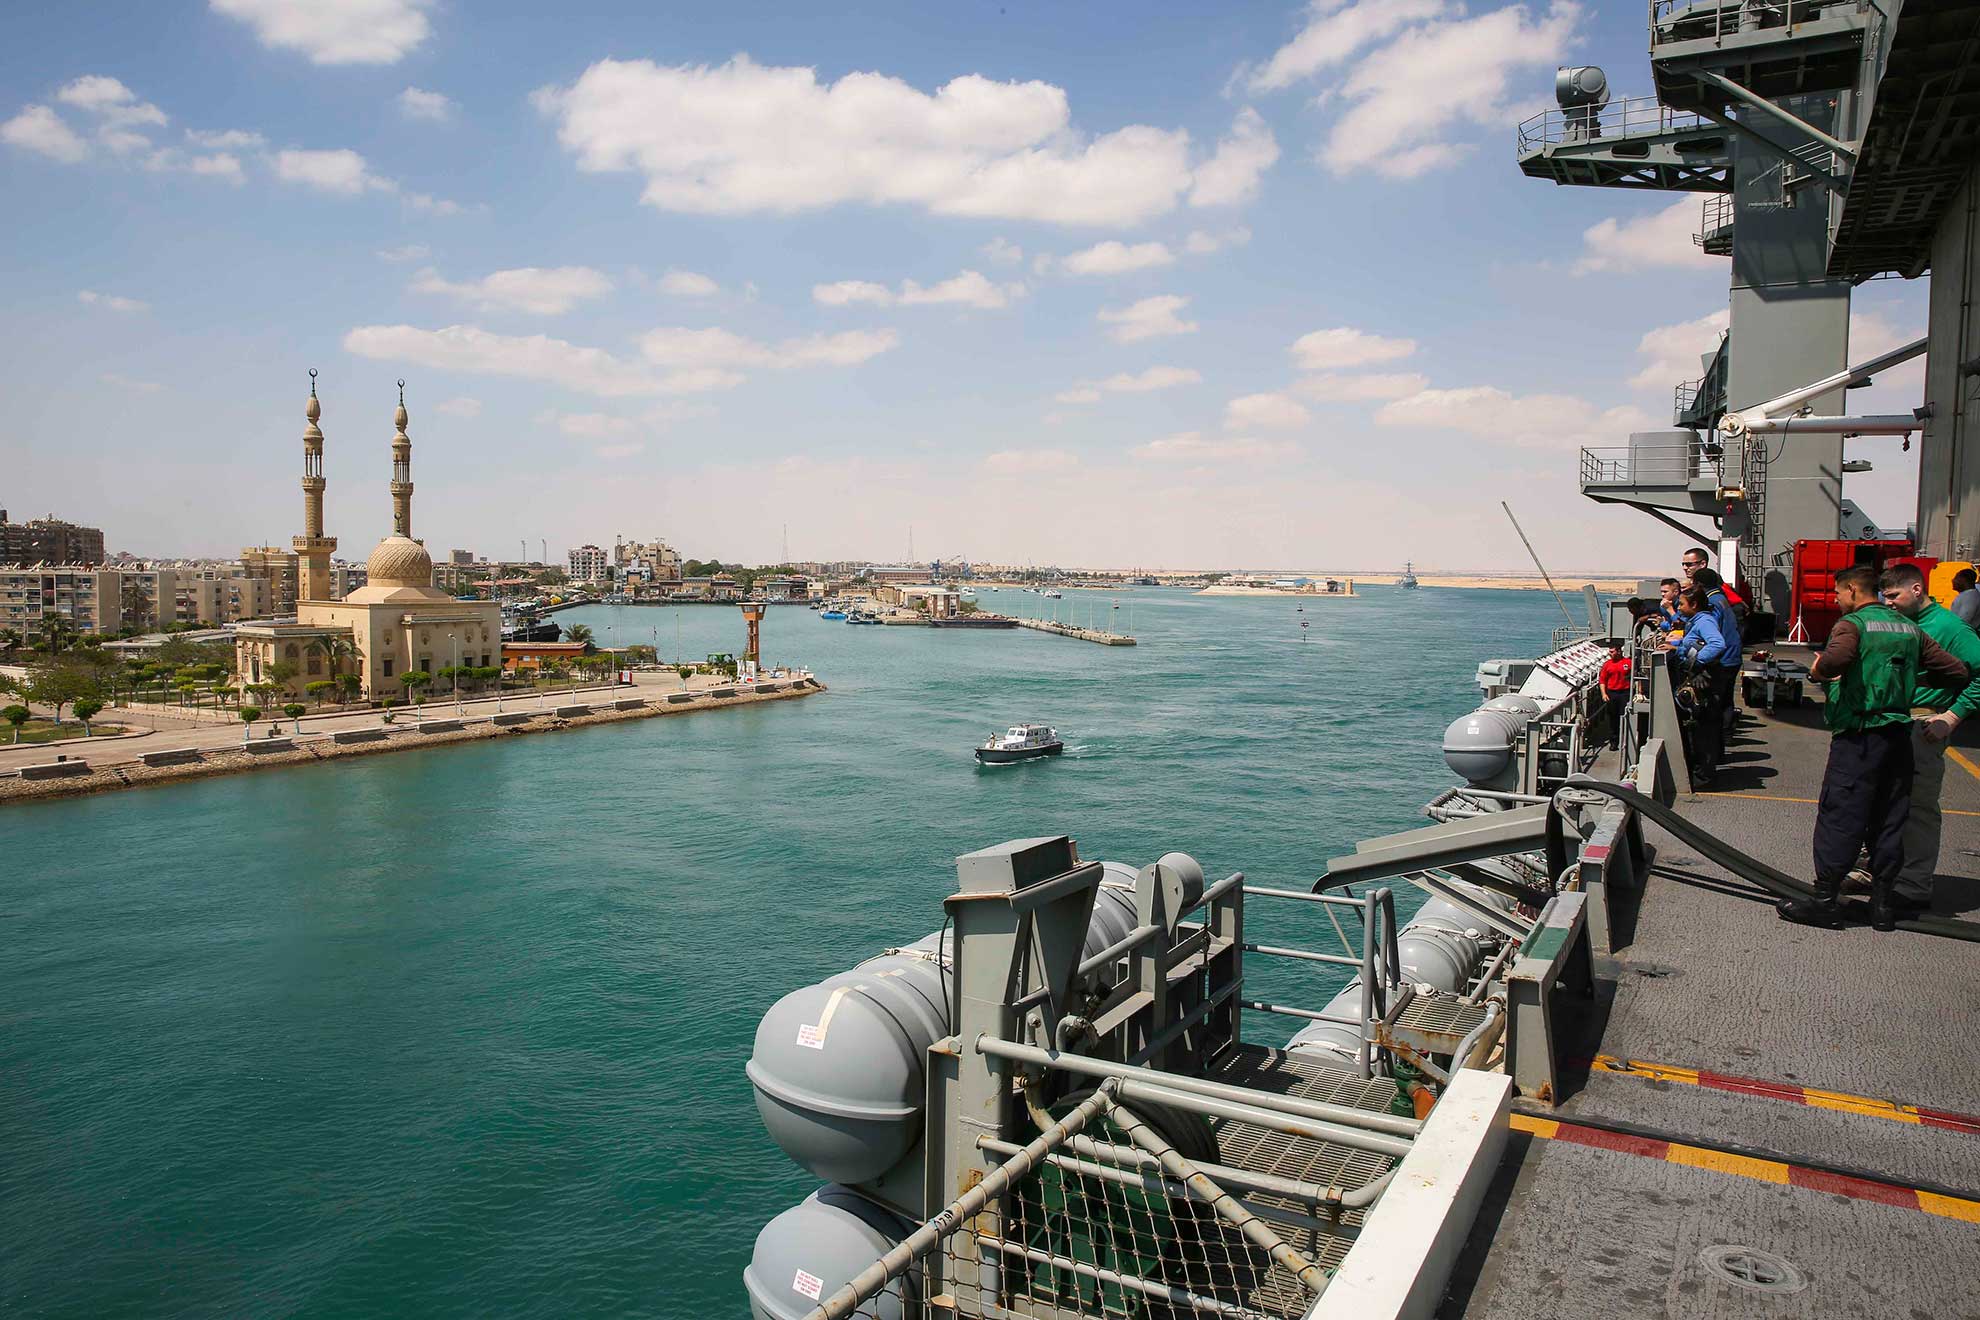 Suez Canal (May 9, 2019) The Nimitz-class aircraft carrier USS Abraham Lincoln (CVN 72) transits the Suez Canal, May 9, 2019. The Abraham Lincoln Carrier Strike Group is deployed to the U.S. Central Command area of responsibility in order to defend American forces and interests in the region. With Abraham Lincoln as the flagship, deployed strike group assets include staffs, ships and aircraft of Carrier Strike Group (CSG) 12, Destroyer Squadron (DESRON) 2, the guided-missile cruiser USS Leyte Gulf (CG 55) and Carrier Air Wing (CVW) 7; as well as the Spanish navy Alvaro de Bazan-class frigate ESPS Mendez Nunez (F 104) -- U.S. Navy photo by MCS 3rd Class Tyler C. Priestley. -